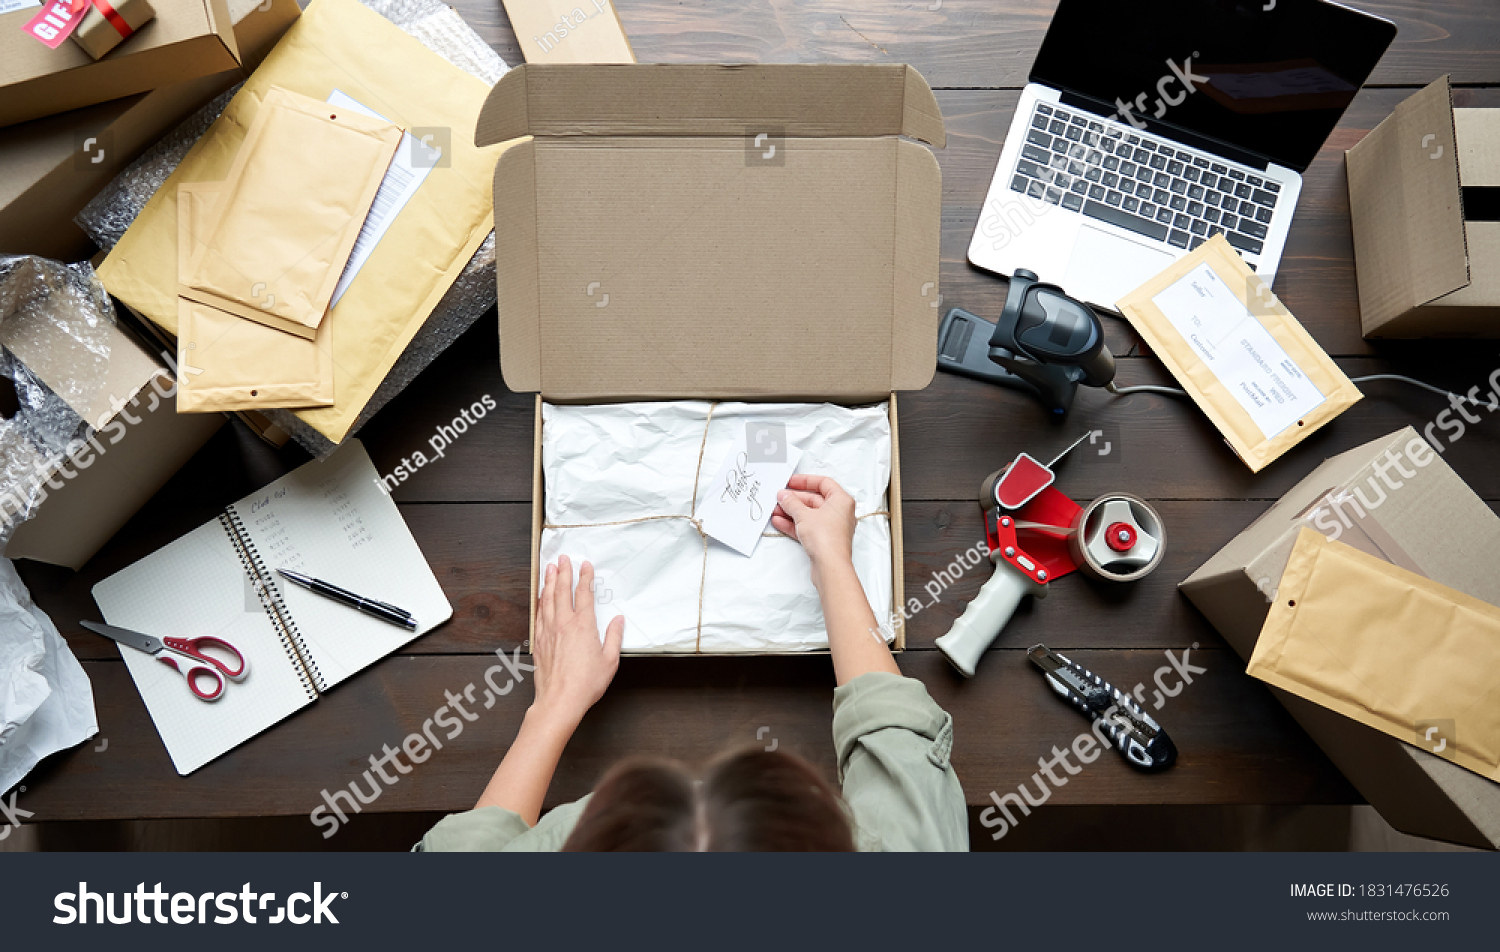 Top above closeup view of female online store small business owner entrepreneur packing package post shipping box preparing delivery parcel on table. Ecommerce dropshipping shipment service concept. #1831476526